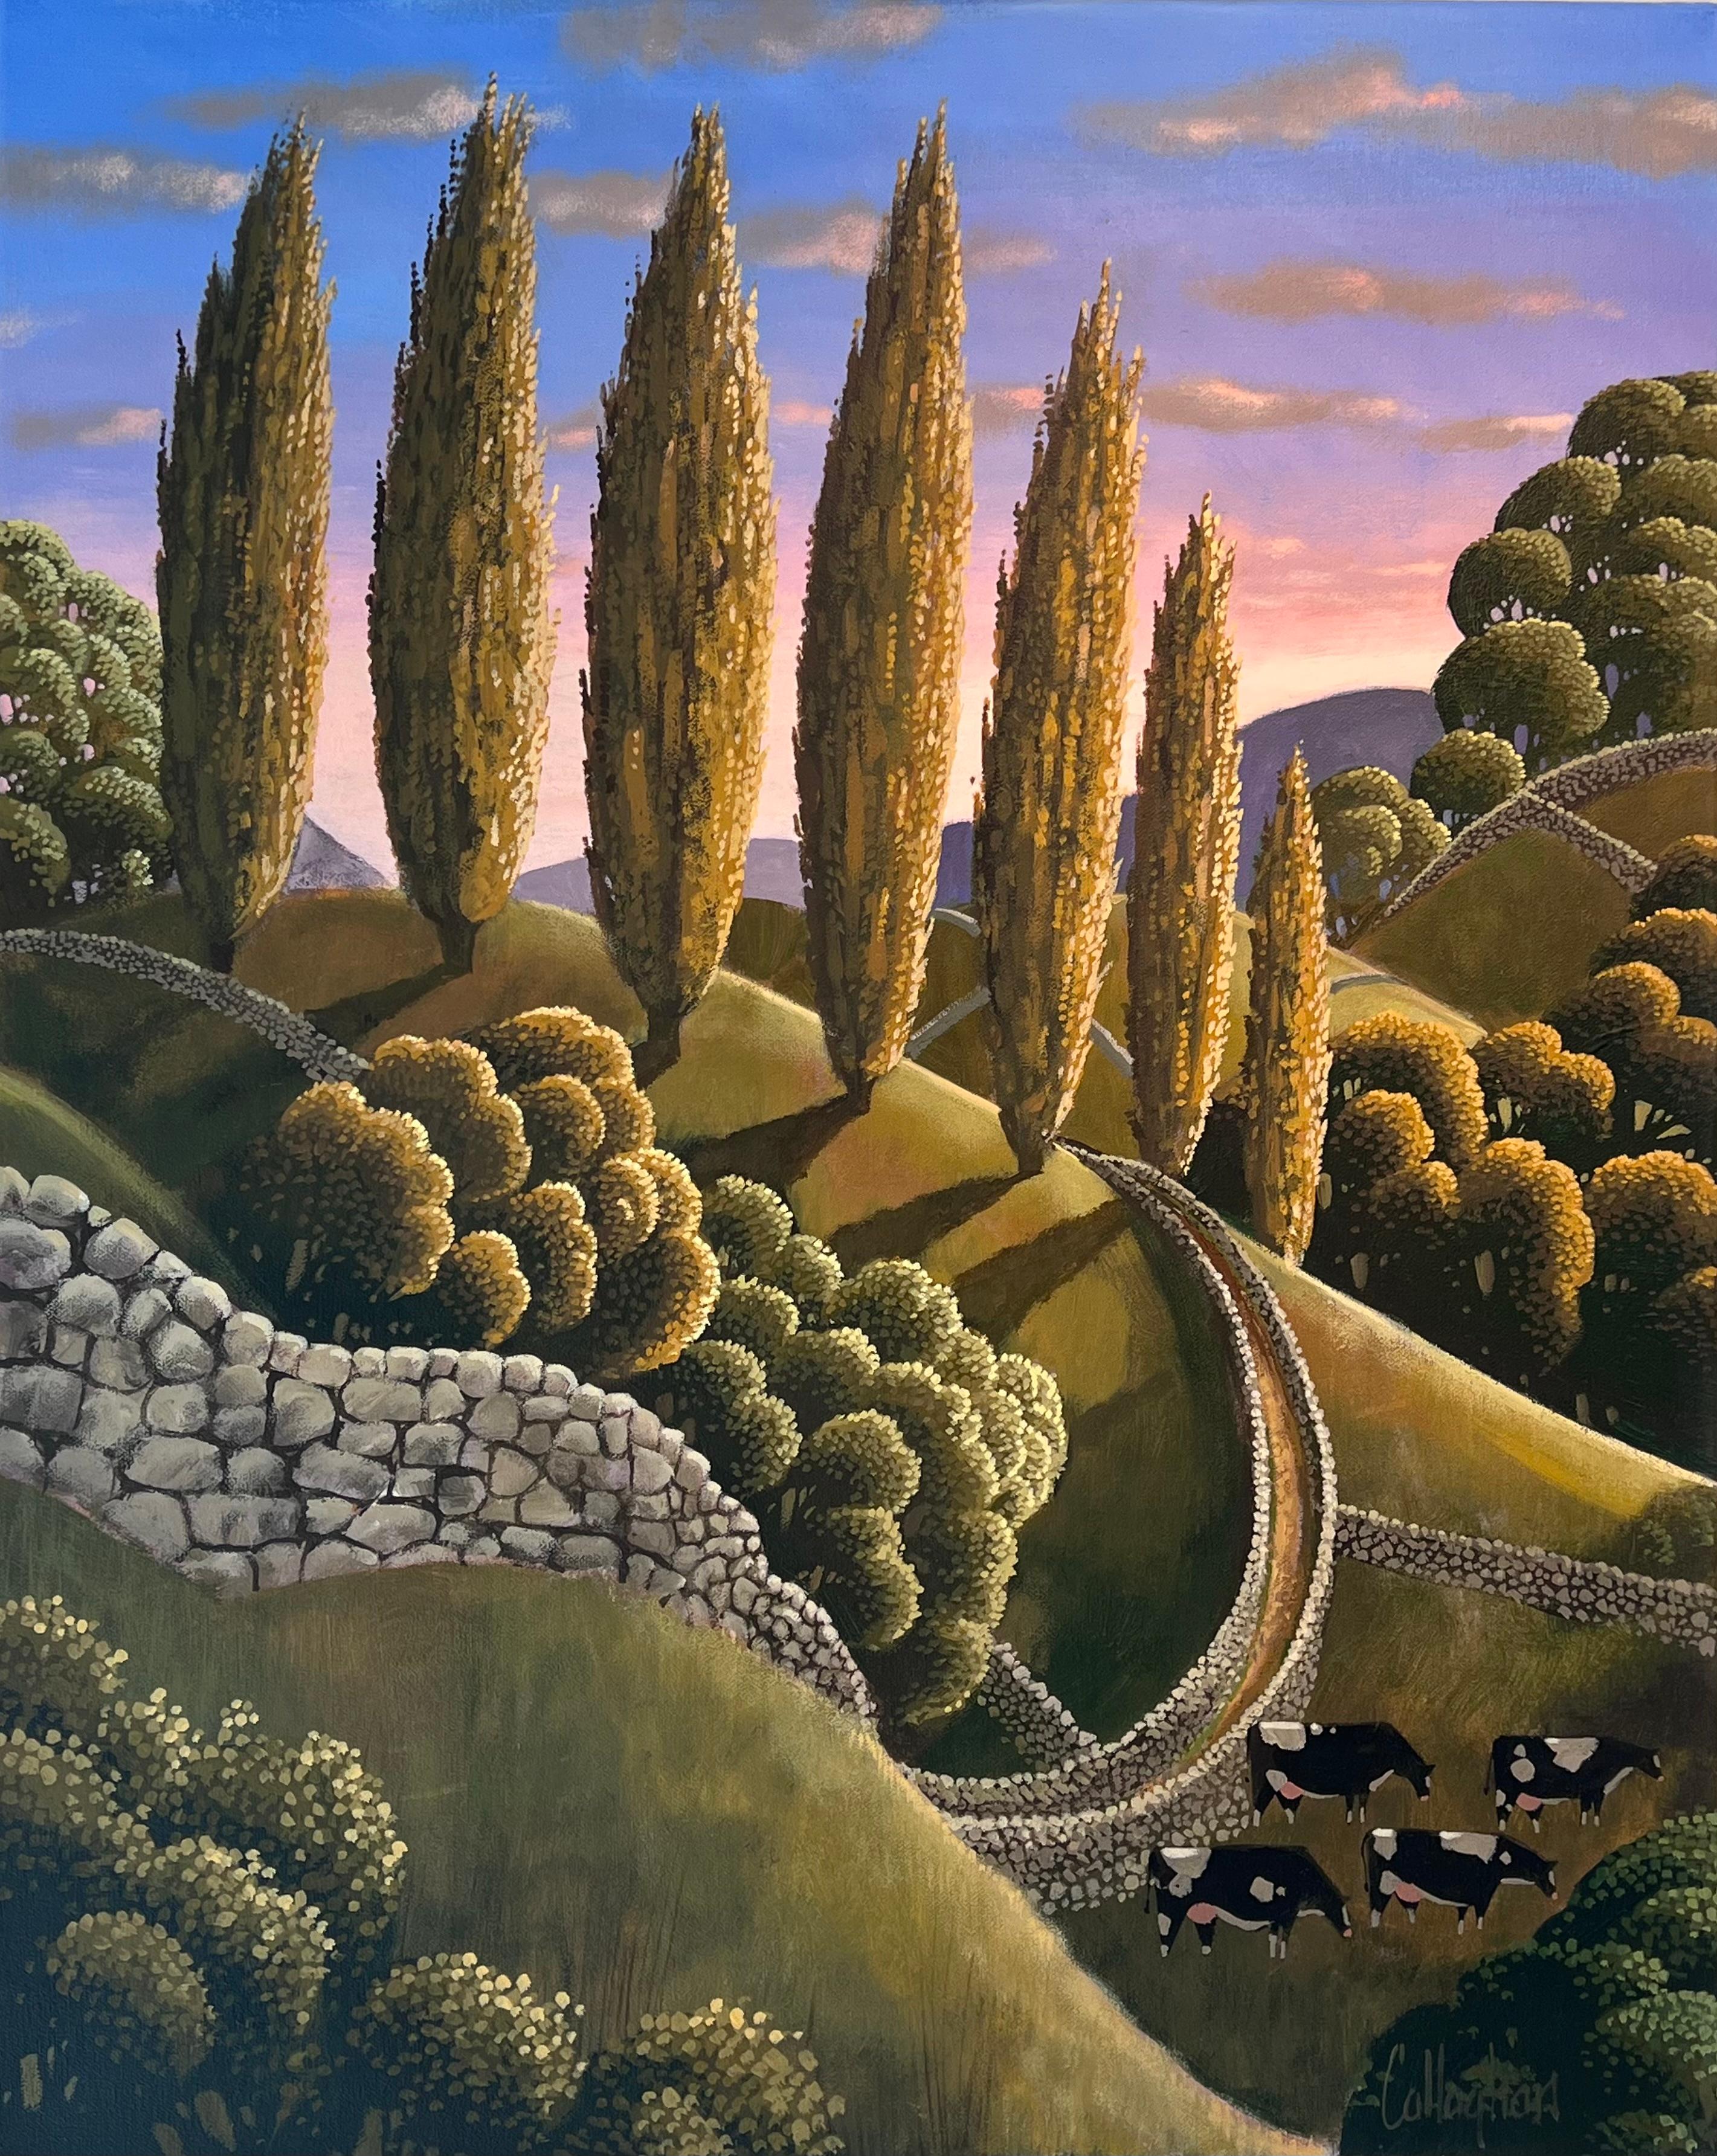 Title: "Passed the Poplars" by George Callaghan invites viewers into a serene and enchanting landscape, where earthy tones juxtapose harmoniously with the vibrant yet calm hues of a sunset sky. In this captivating painting, the scene draws the